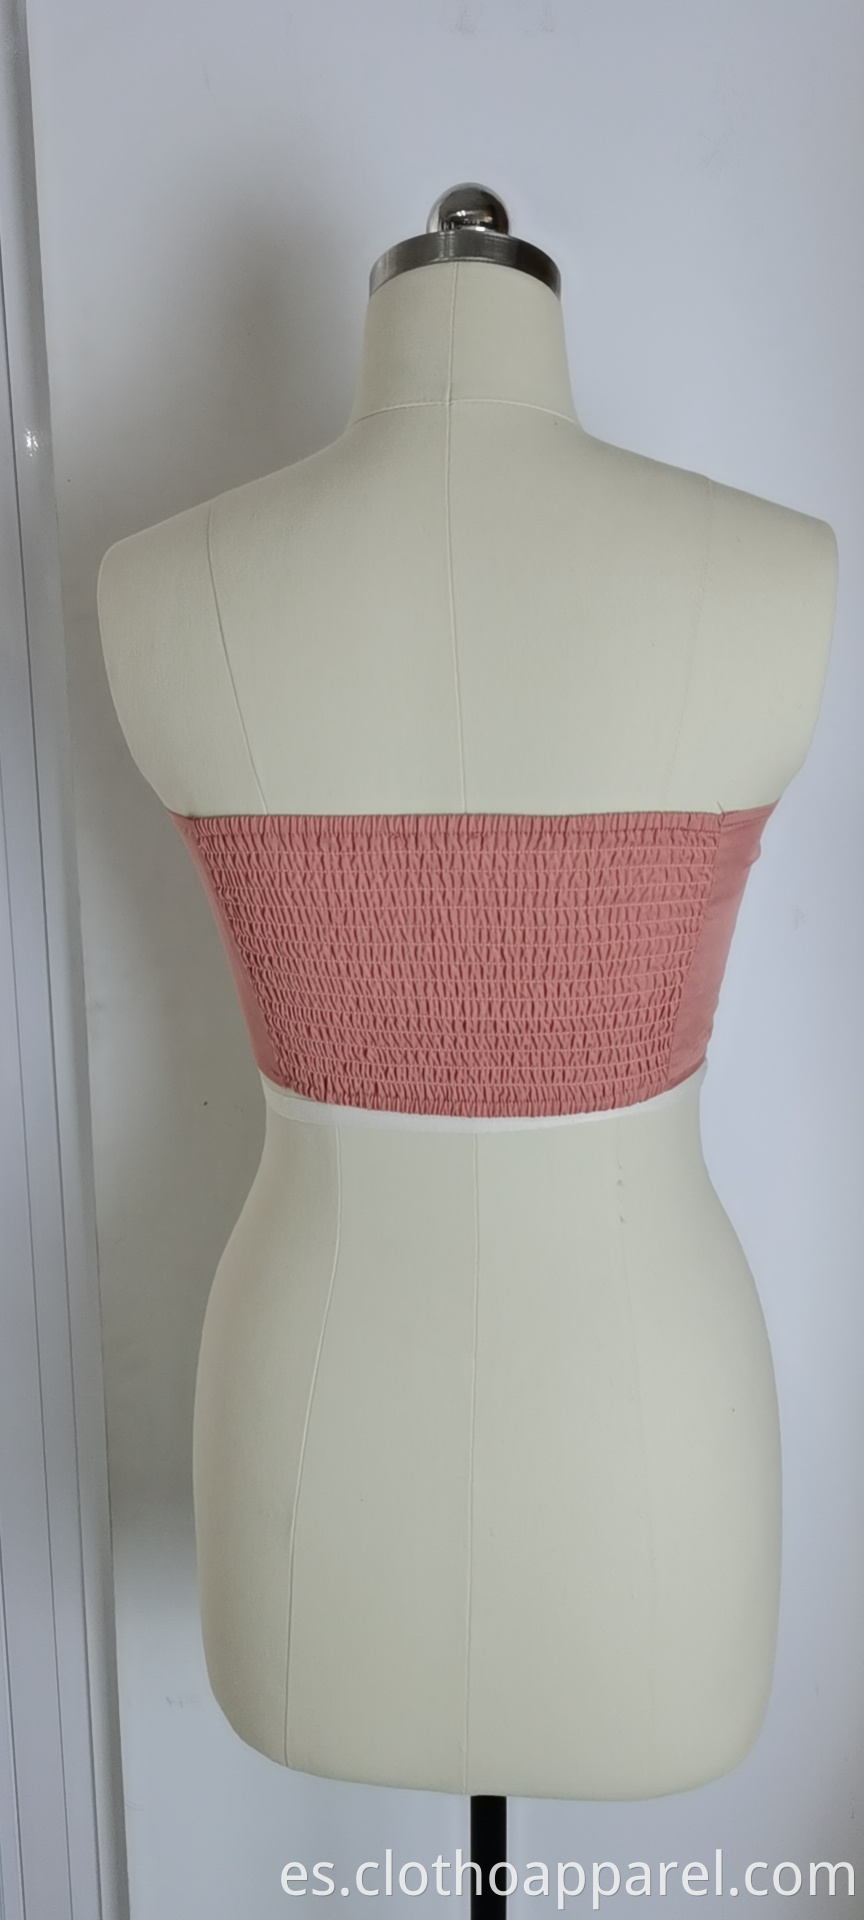 Women's Pink Underwear With Pleated Buttons